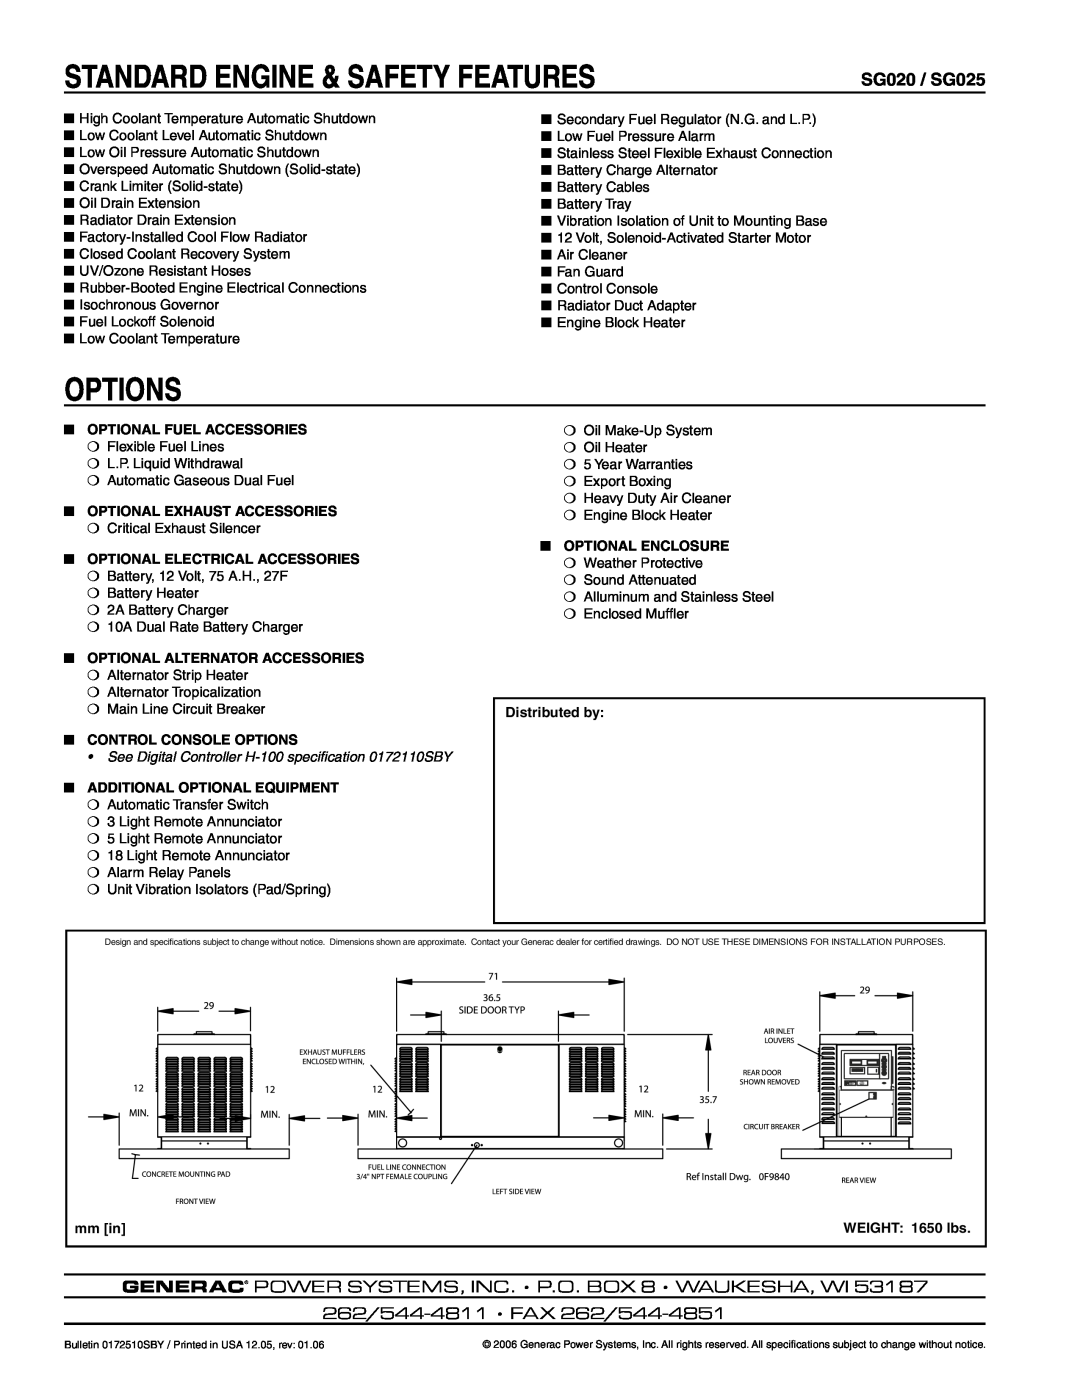 Generac Power Systems manual Standard Engine & Safety Features, Options, SG020 / SG025, 262/544-4811 FAX 262/544-4851 